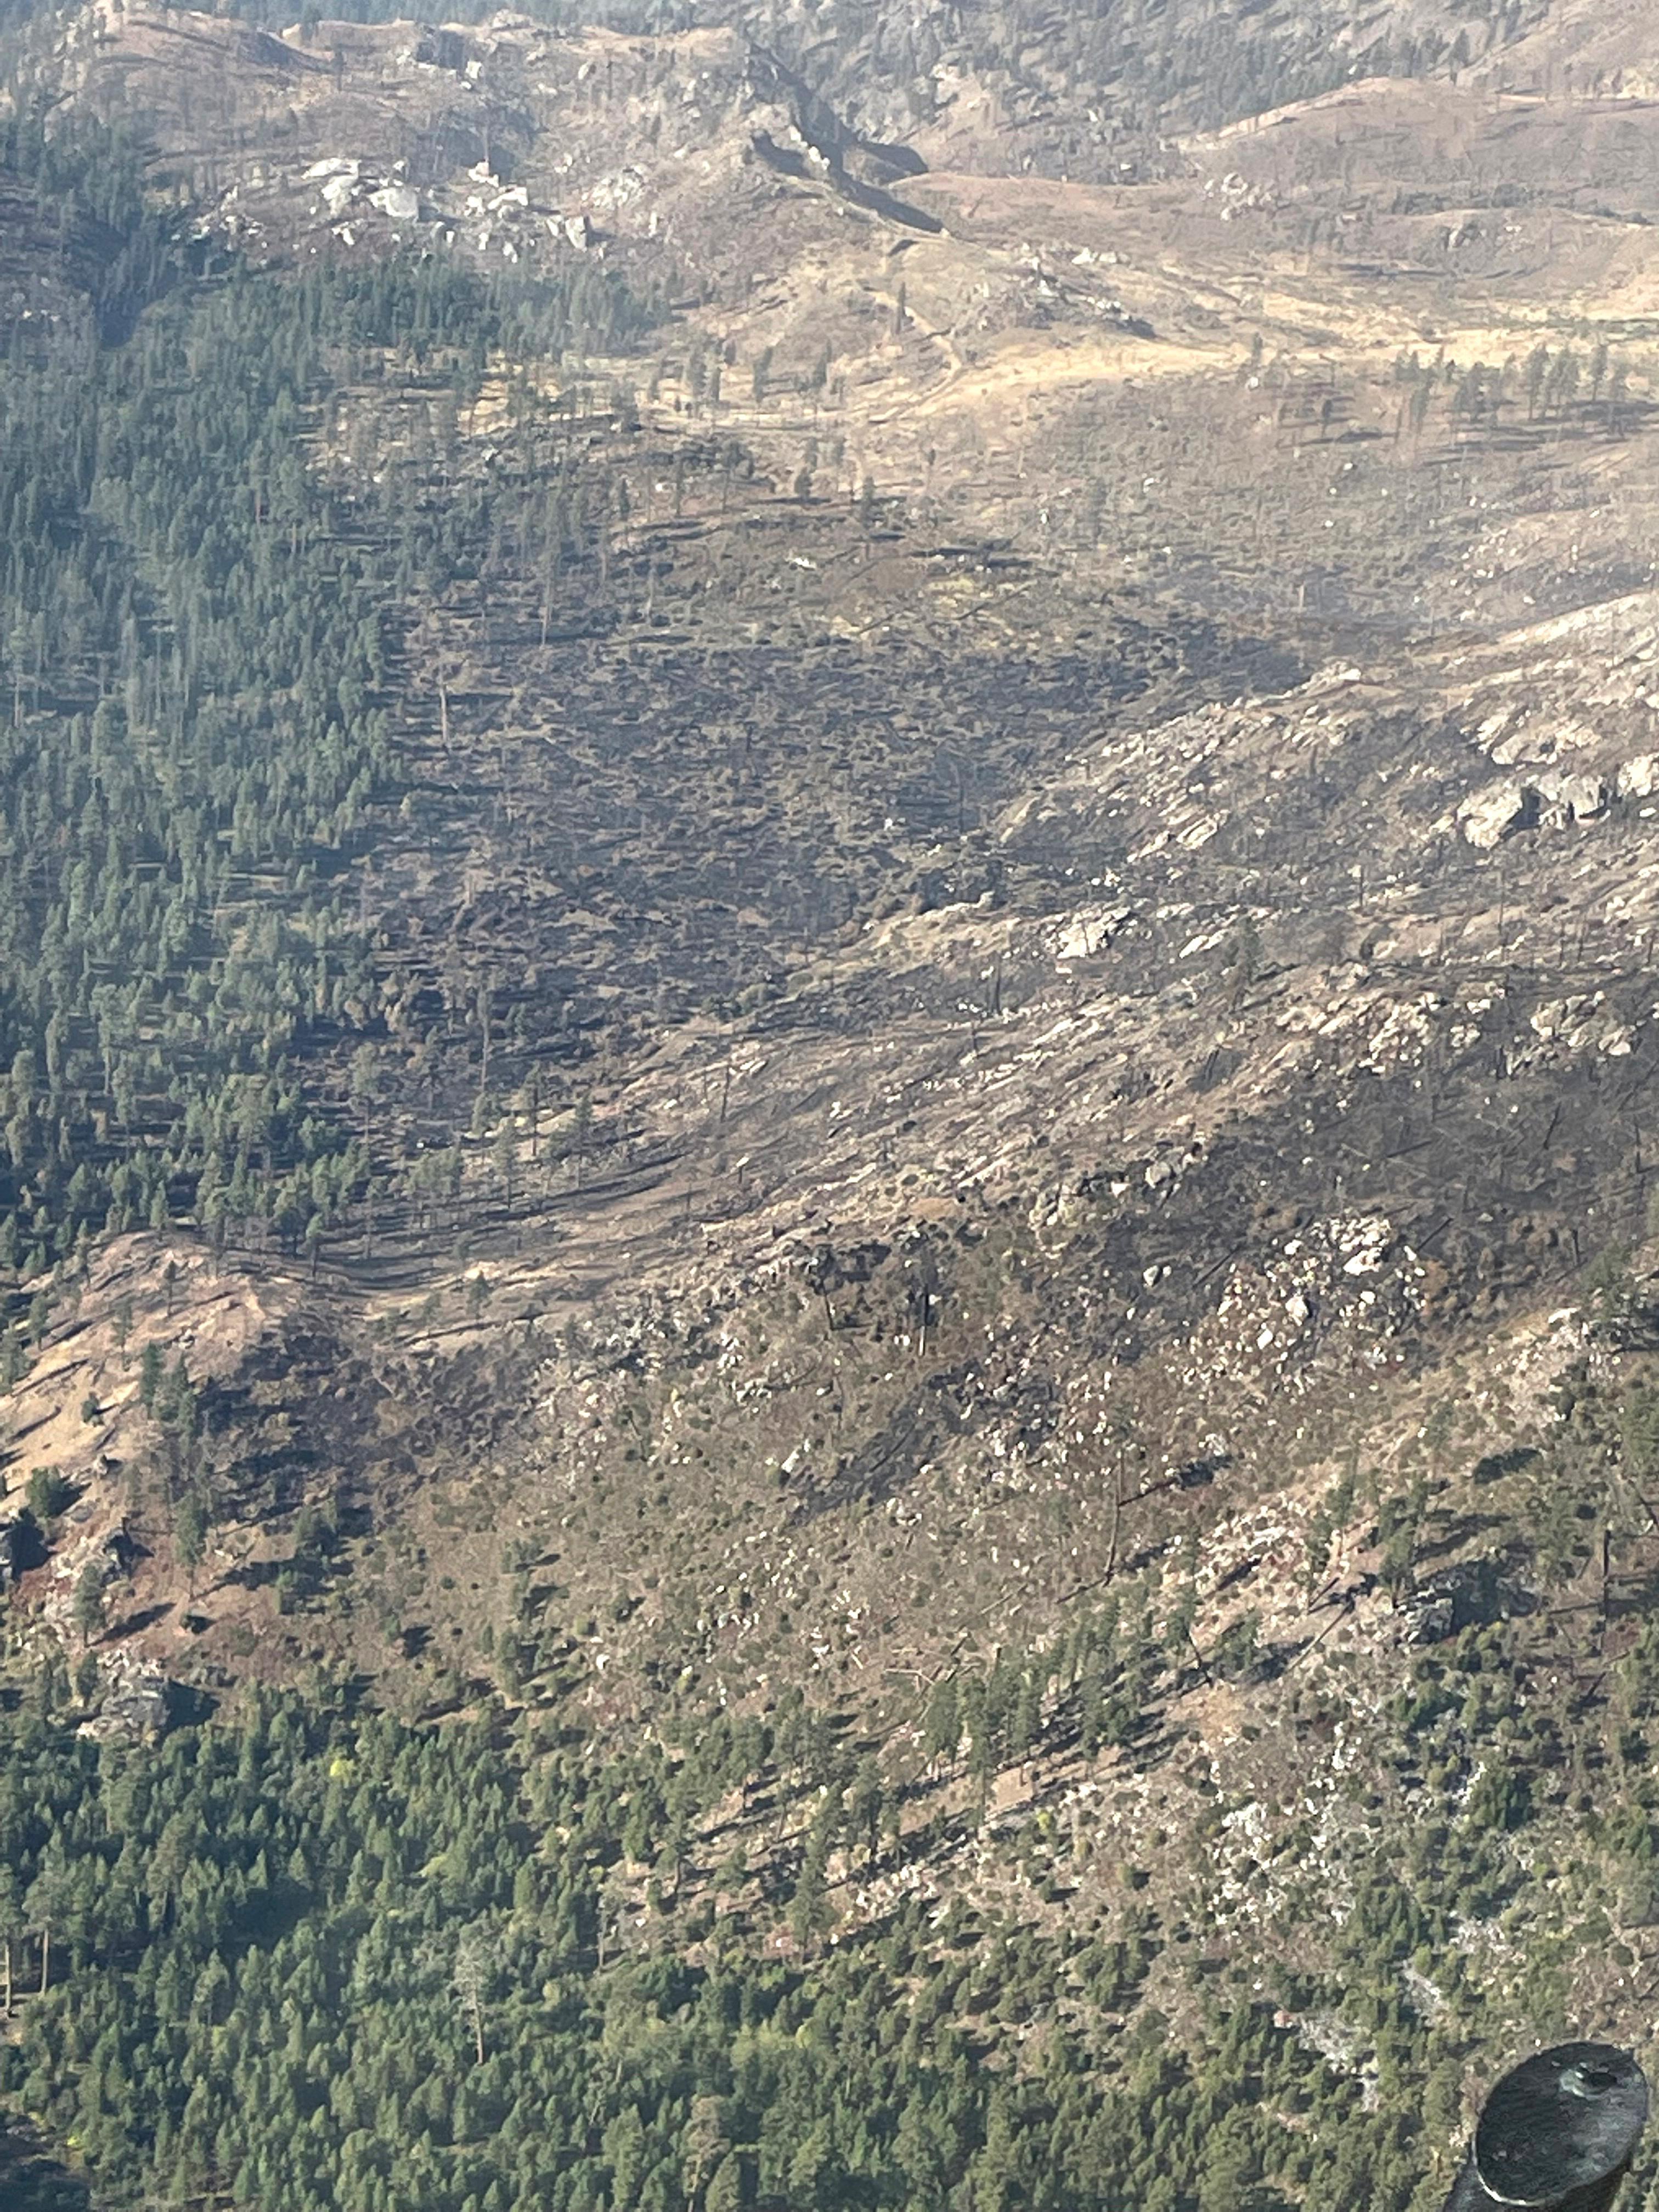 All is quiet on the Owl Fire today, as you can see from this picture taken from a helicopter this morning.